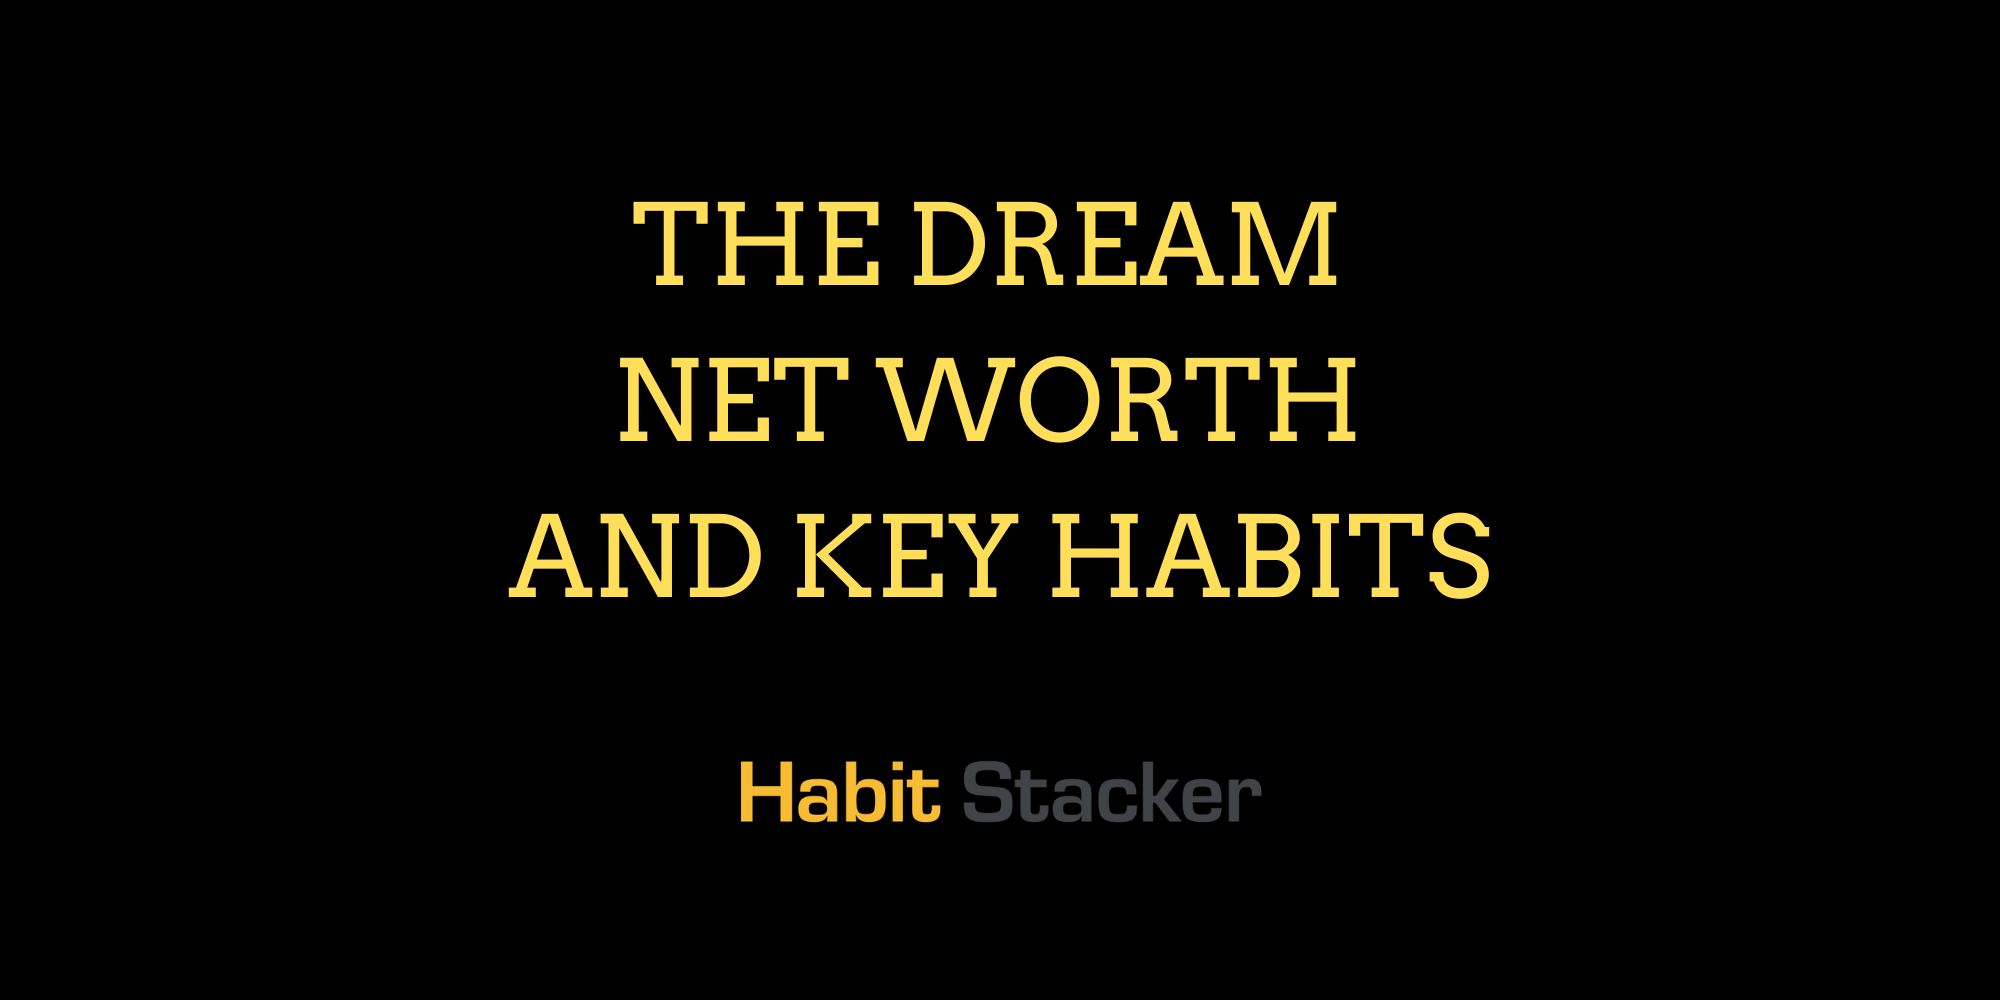 The Dream Net Worth and Key Habits